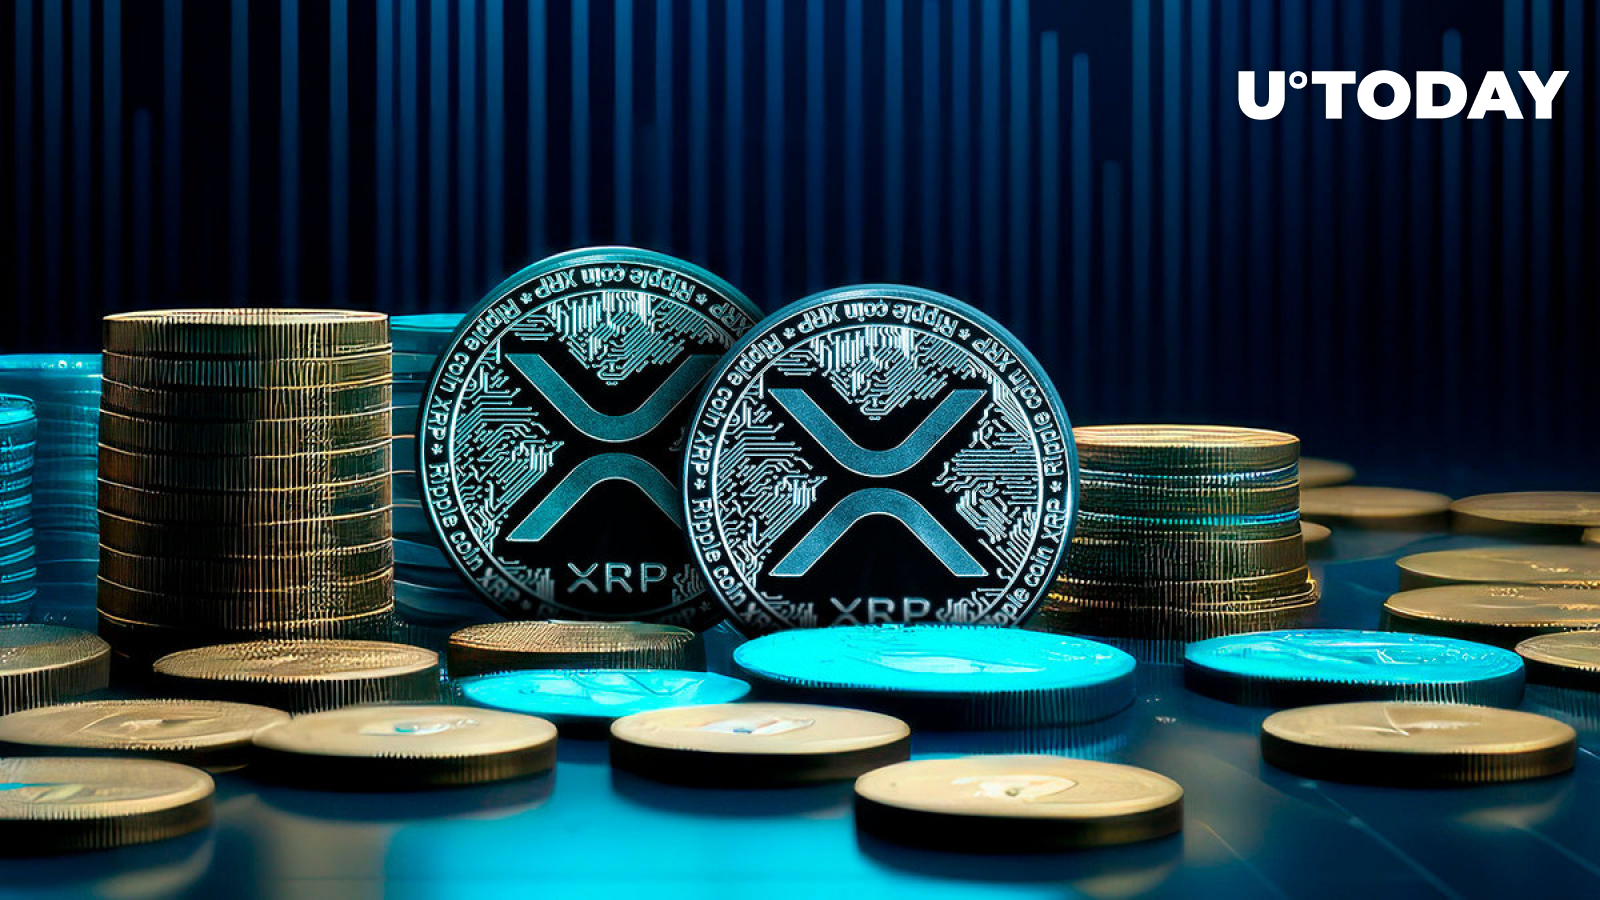 XRP Investors on Alert as XRP Price History Signals Stormy February Ahead